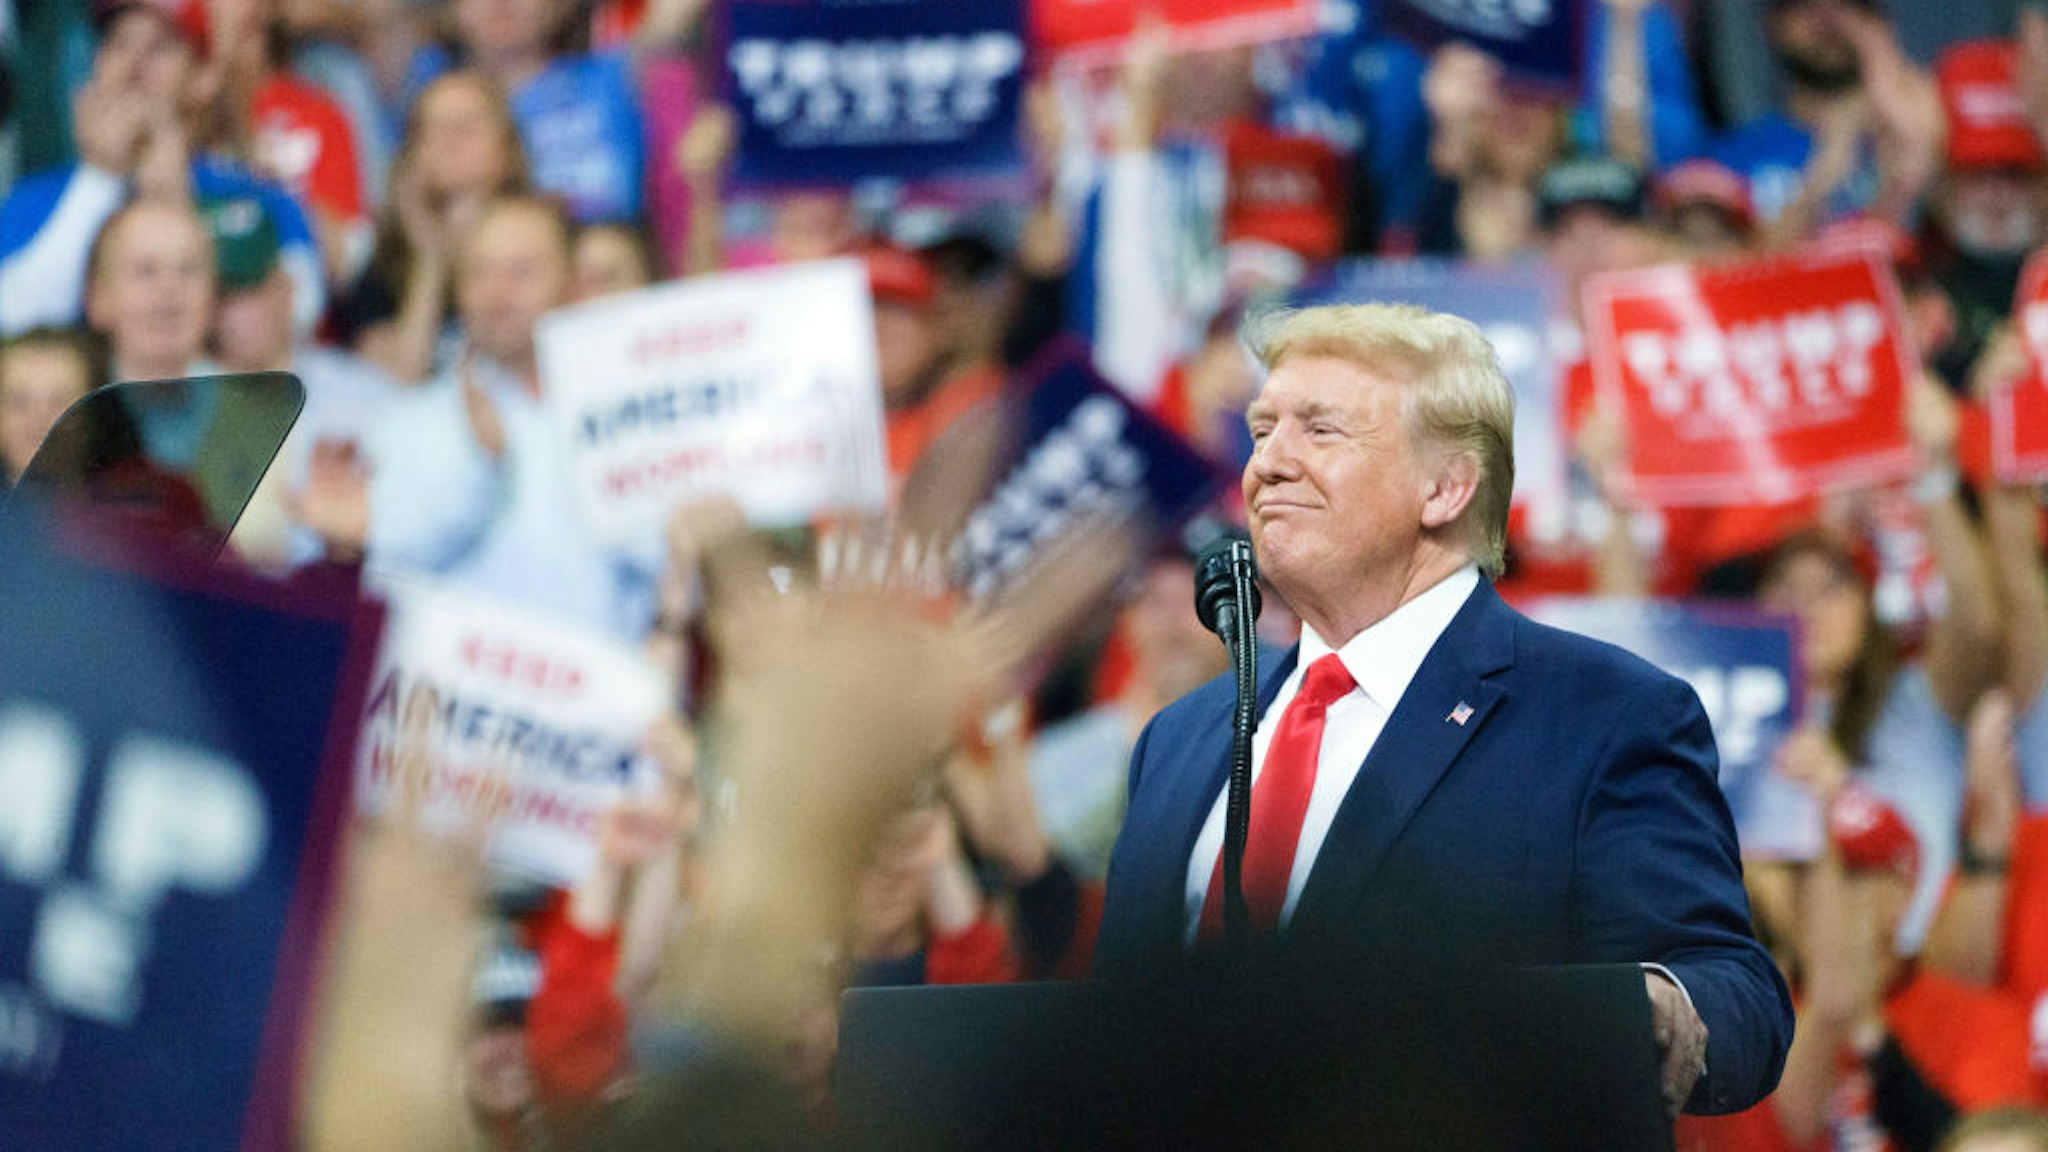 U.S. President Donald Trump reacts during a rally in Minneapolis, Minnesota, U.S., on Thursday, Oct. 10, 2019. Trump said the first day of high-level trade negotiations between the U.S. and China on Thursday went "very well" and that he plans to meet with the top Chinese negotiator Friday.